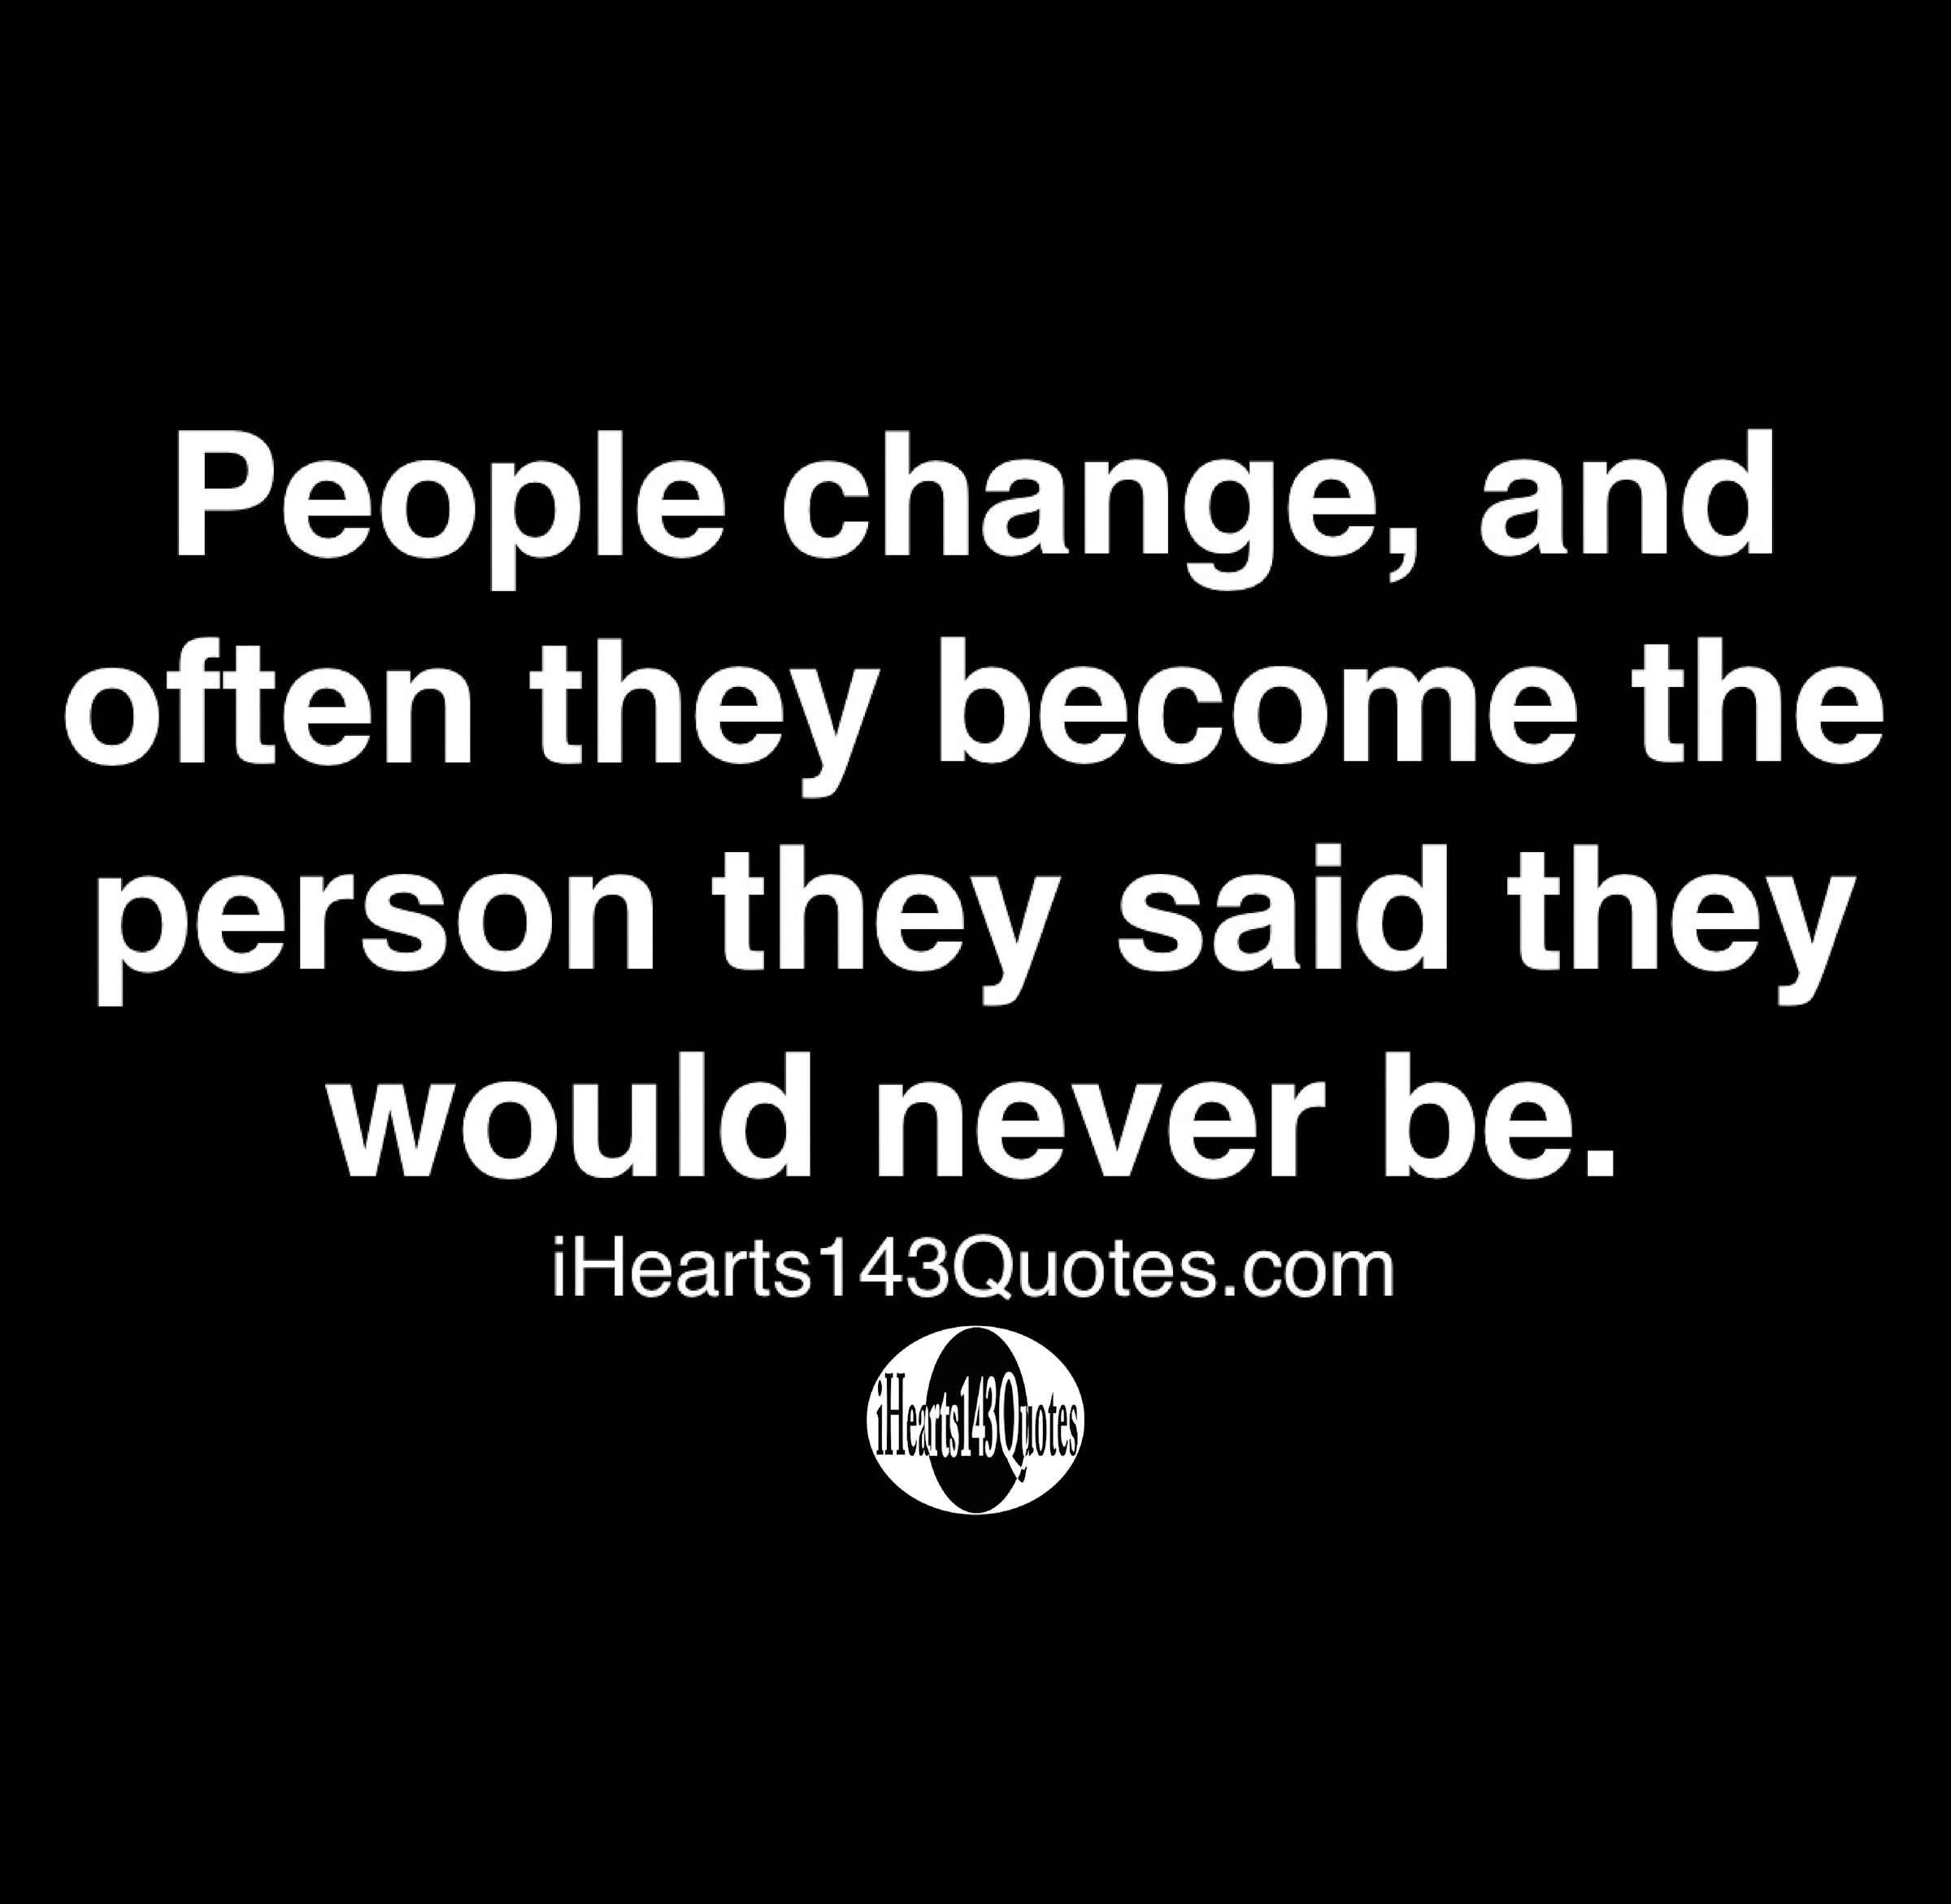 quotes about people changing for the better